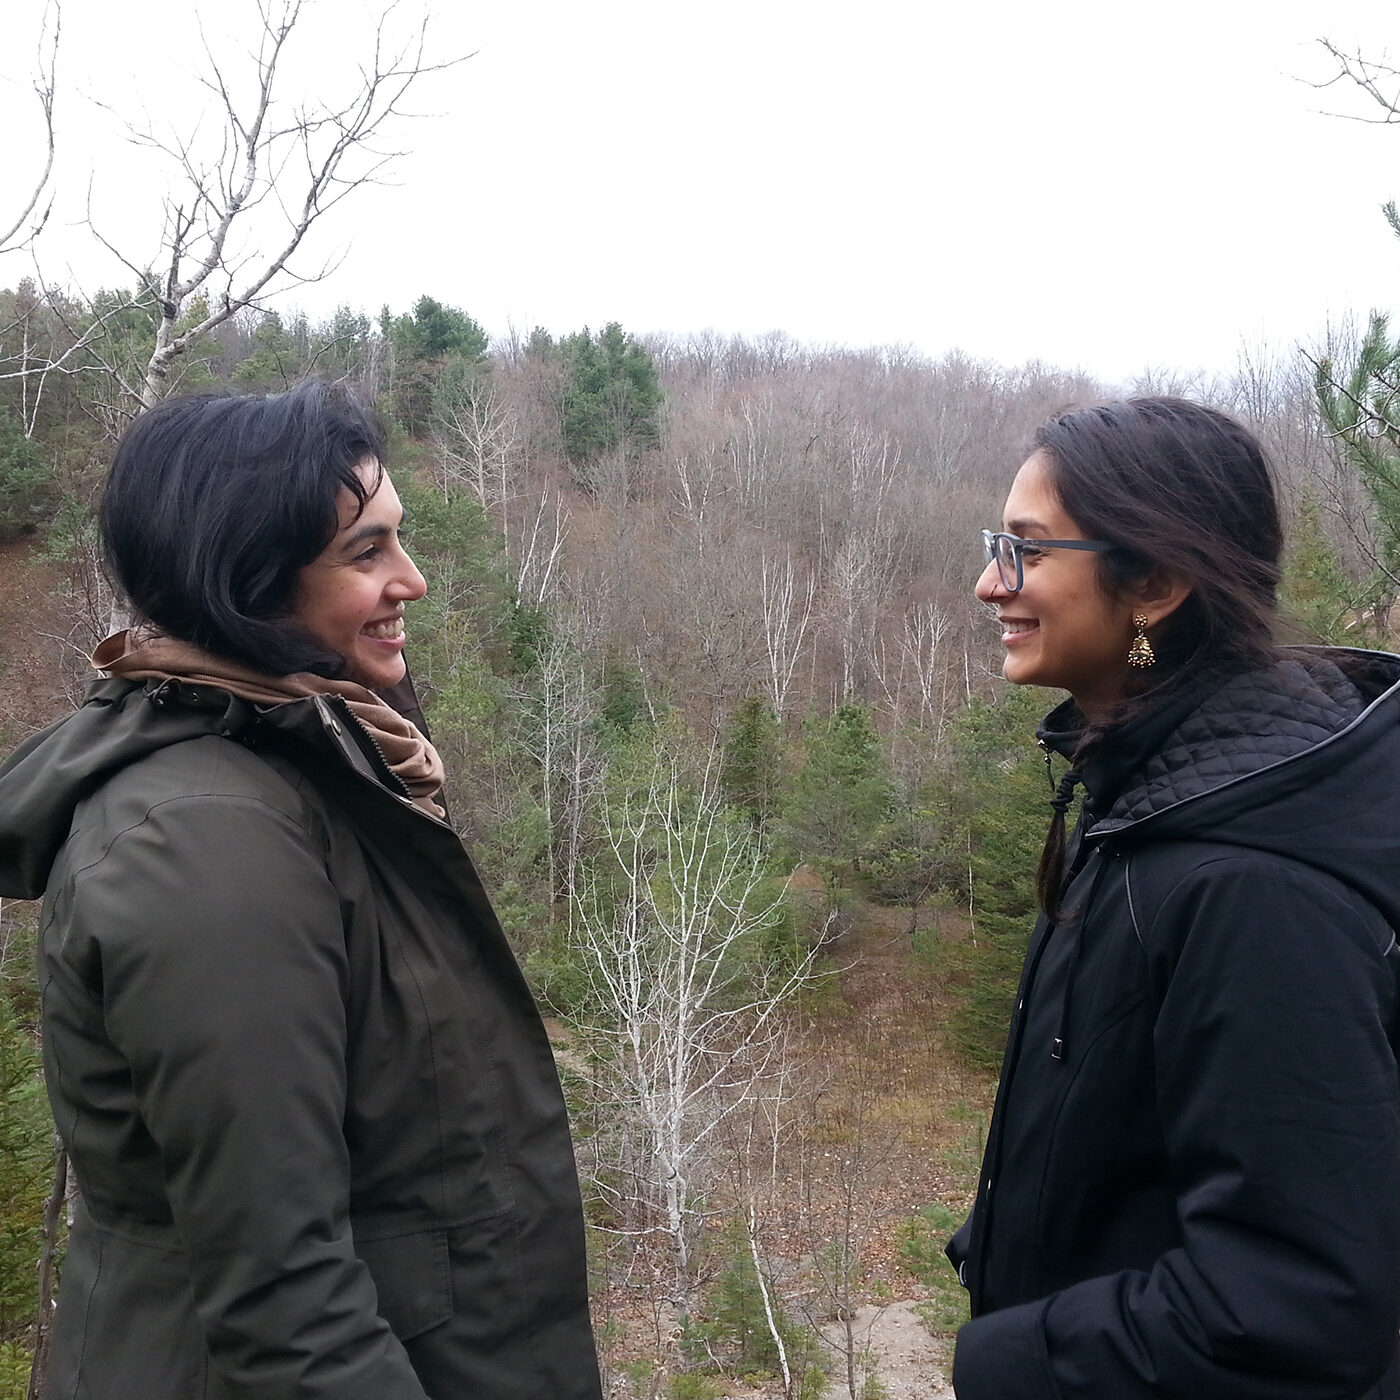 Two women stand facing each other against a wide landscape of bare trees and evergreens. Both have long dark hair and light brown skin, and both are wearing warm jackets and smiling at each other.